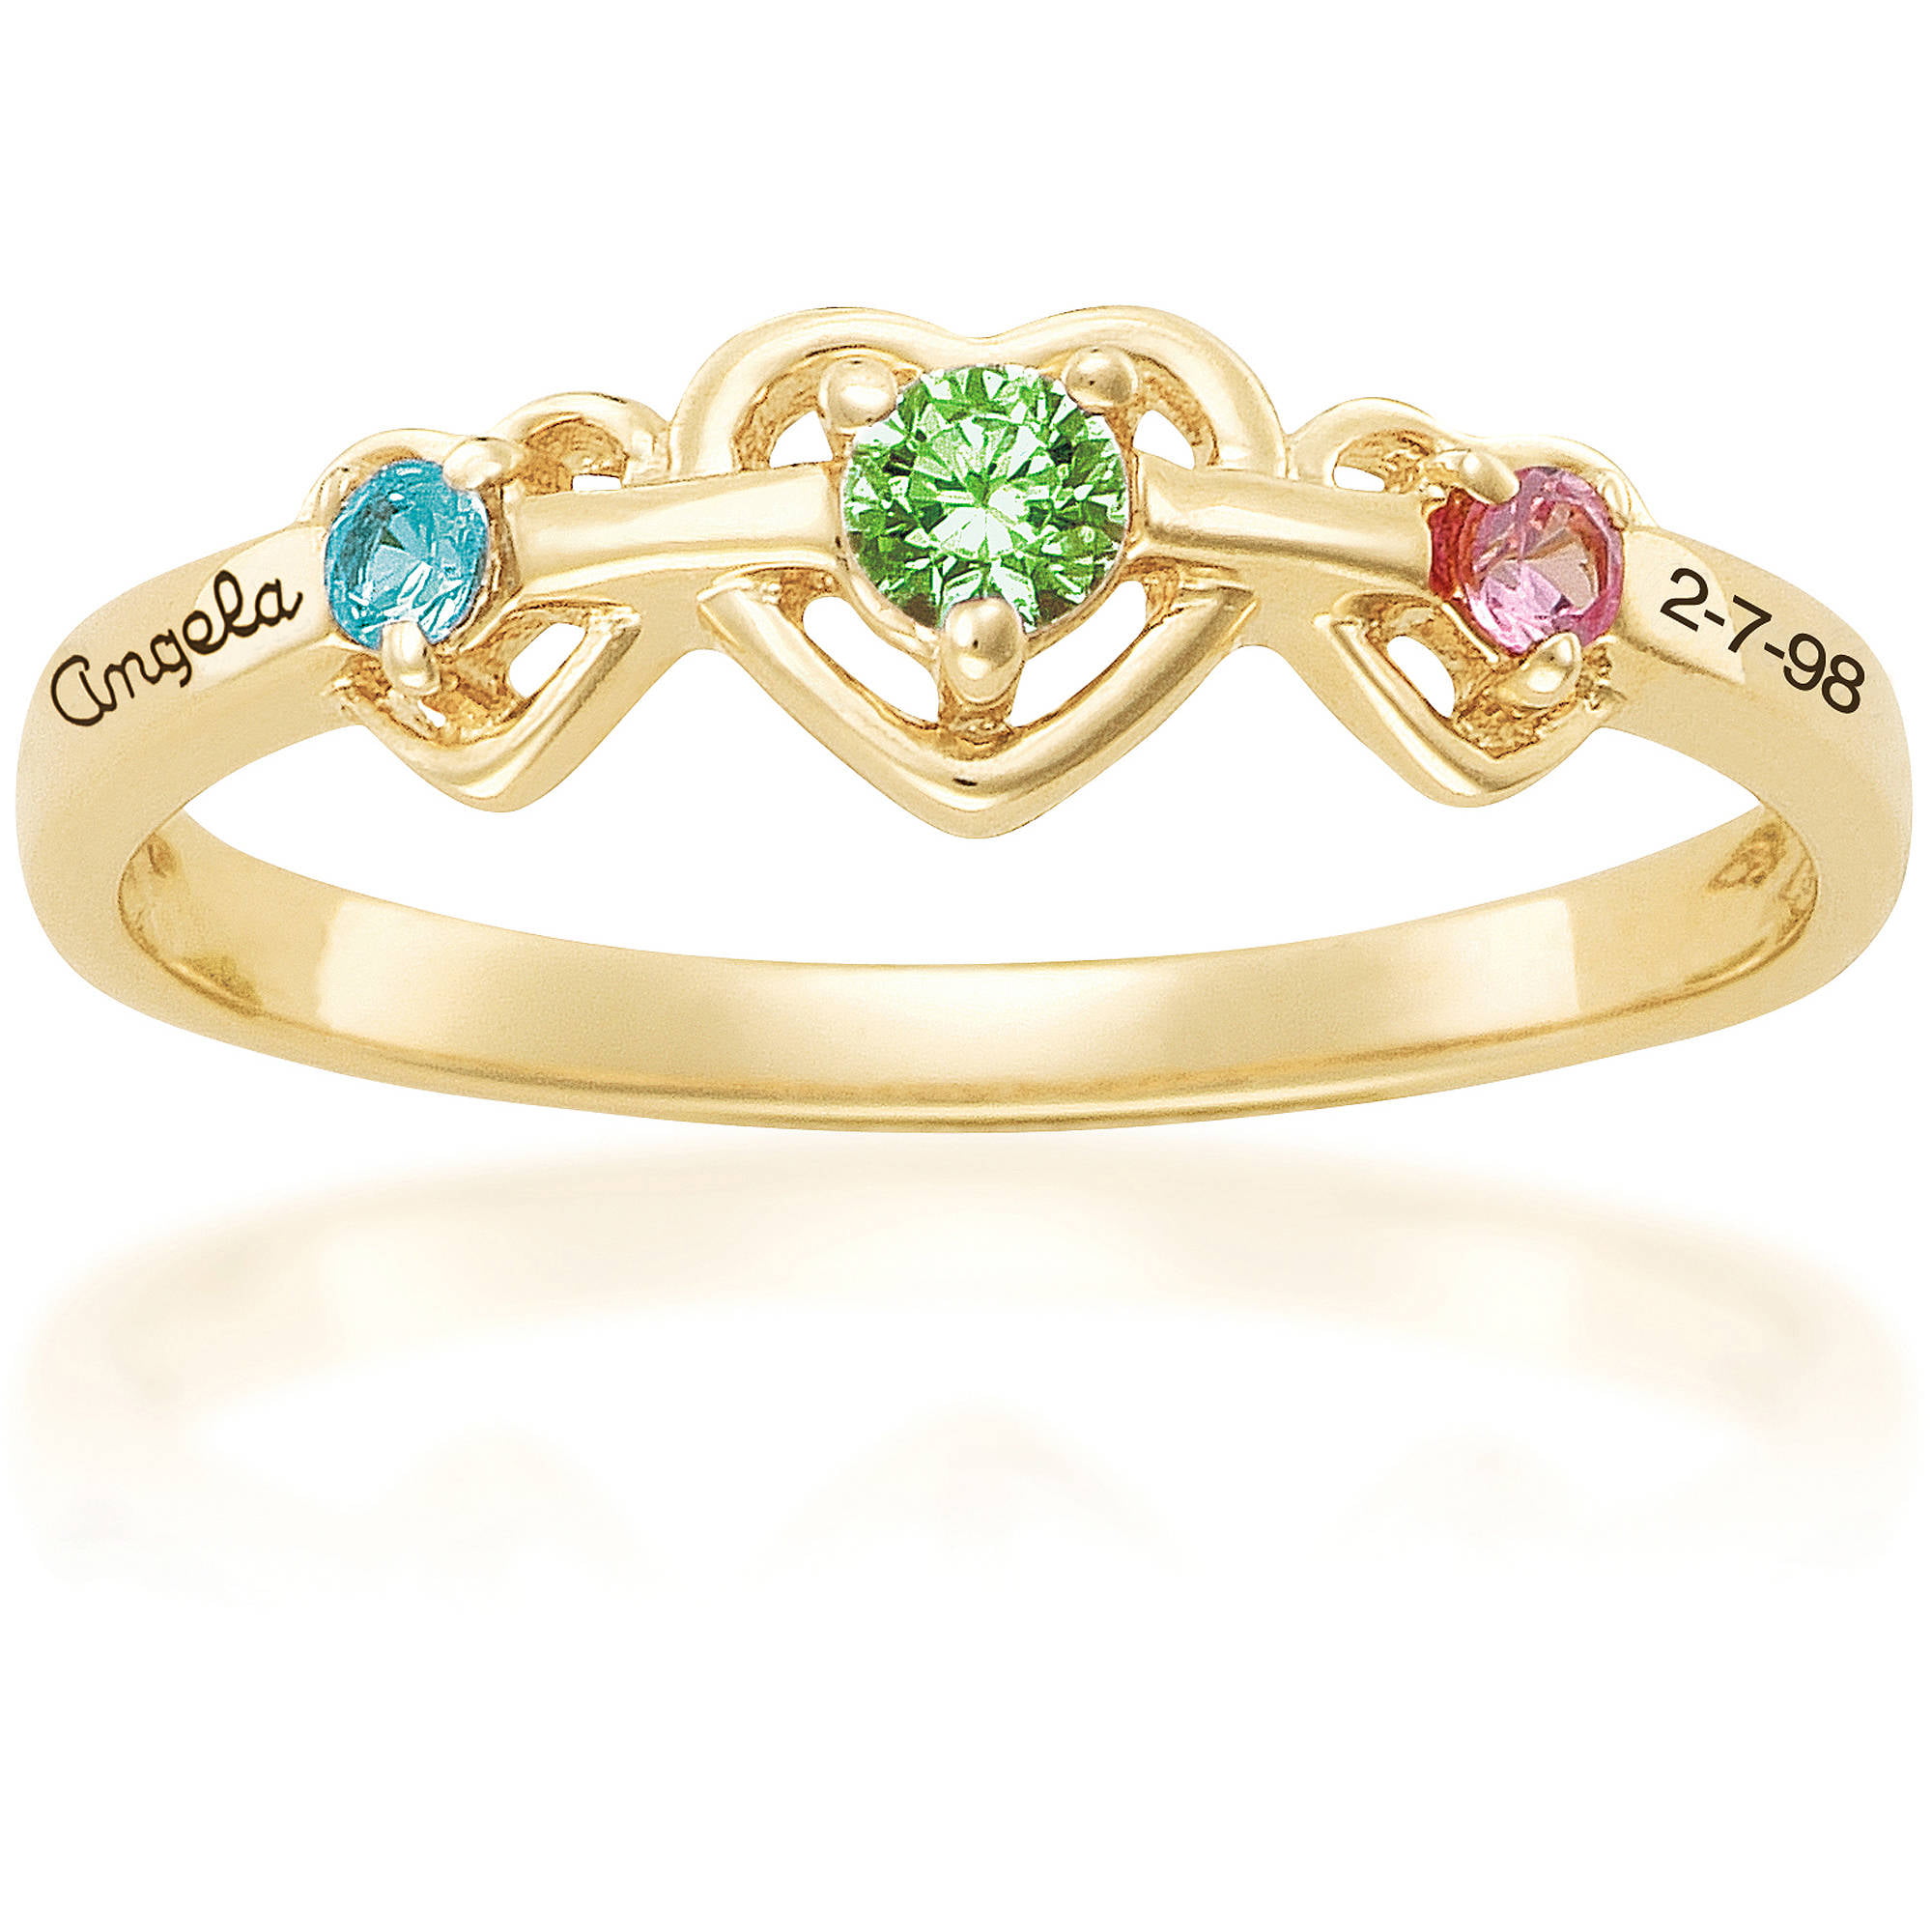 Heart Personalized Engraved Birthstone Rings For Women - CALLIE